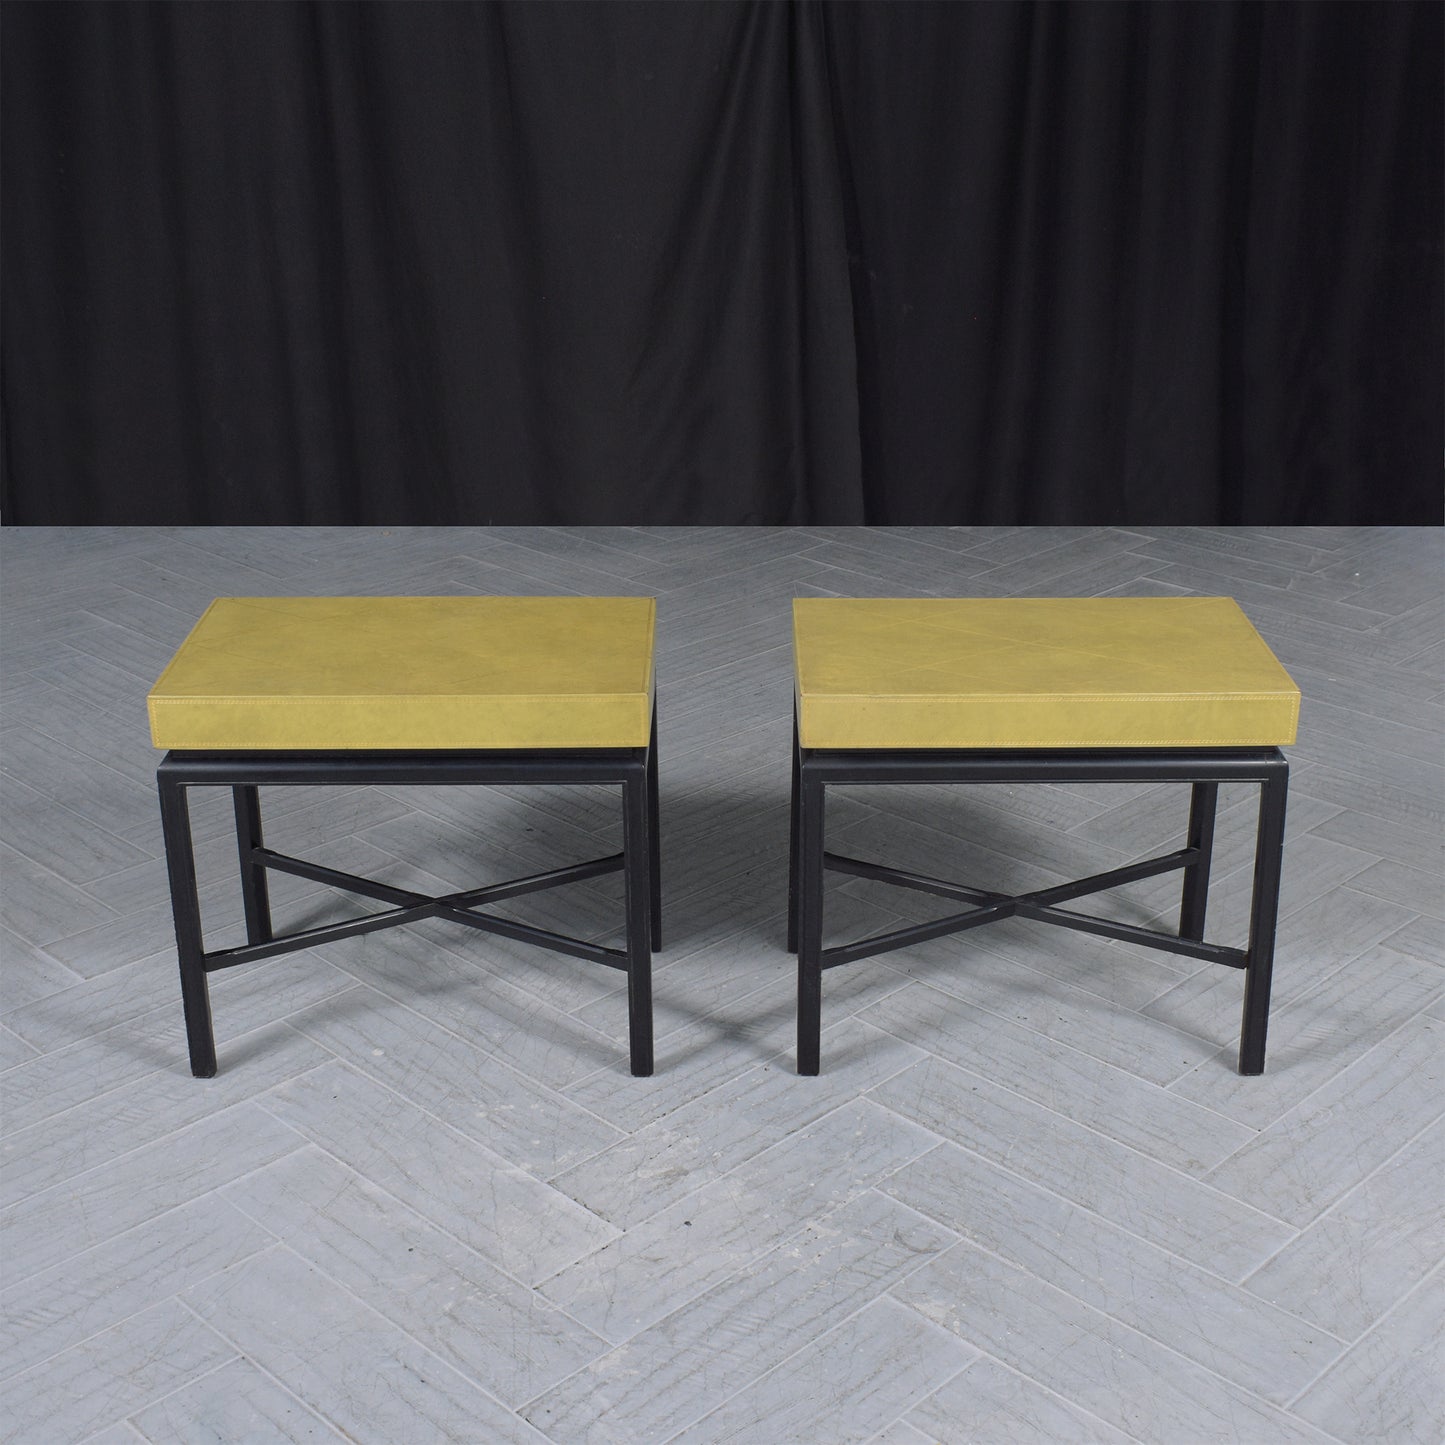 Pair of Restored Vintage Sheraton Style Side Tables with Green Leather Top